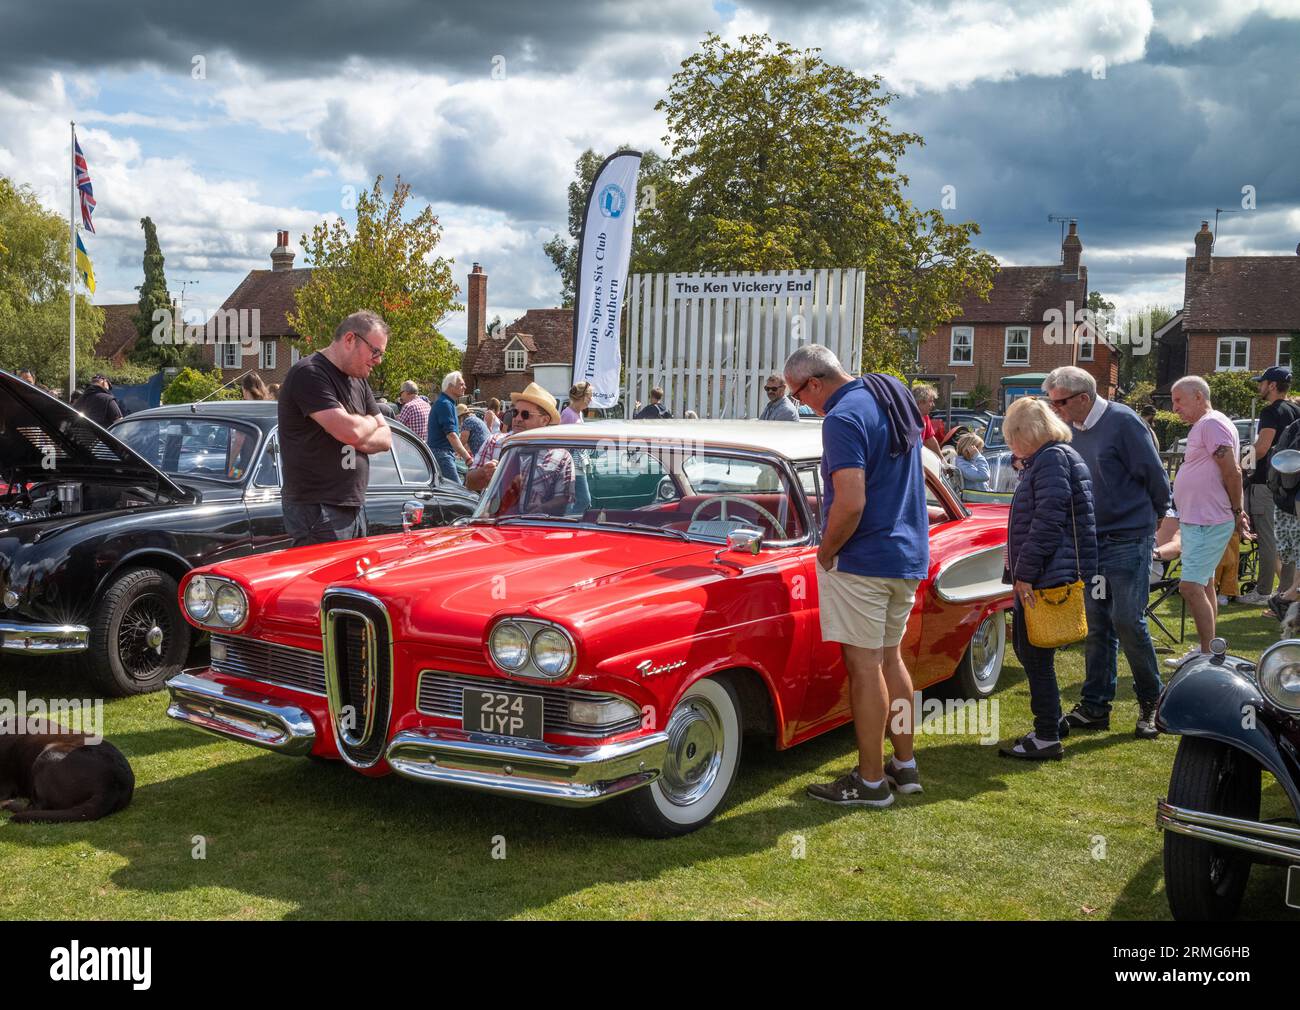 People stop to look at a bright red 1958 Ford Edsel car from the USA at Wisborough Green Village Fete, West Sussex, UK. The car, when it was launched, Stock Photo